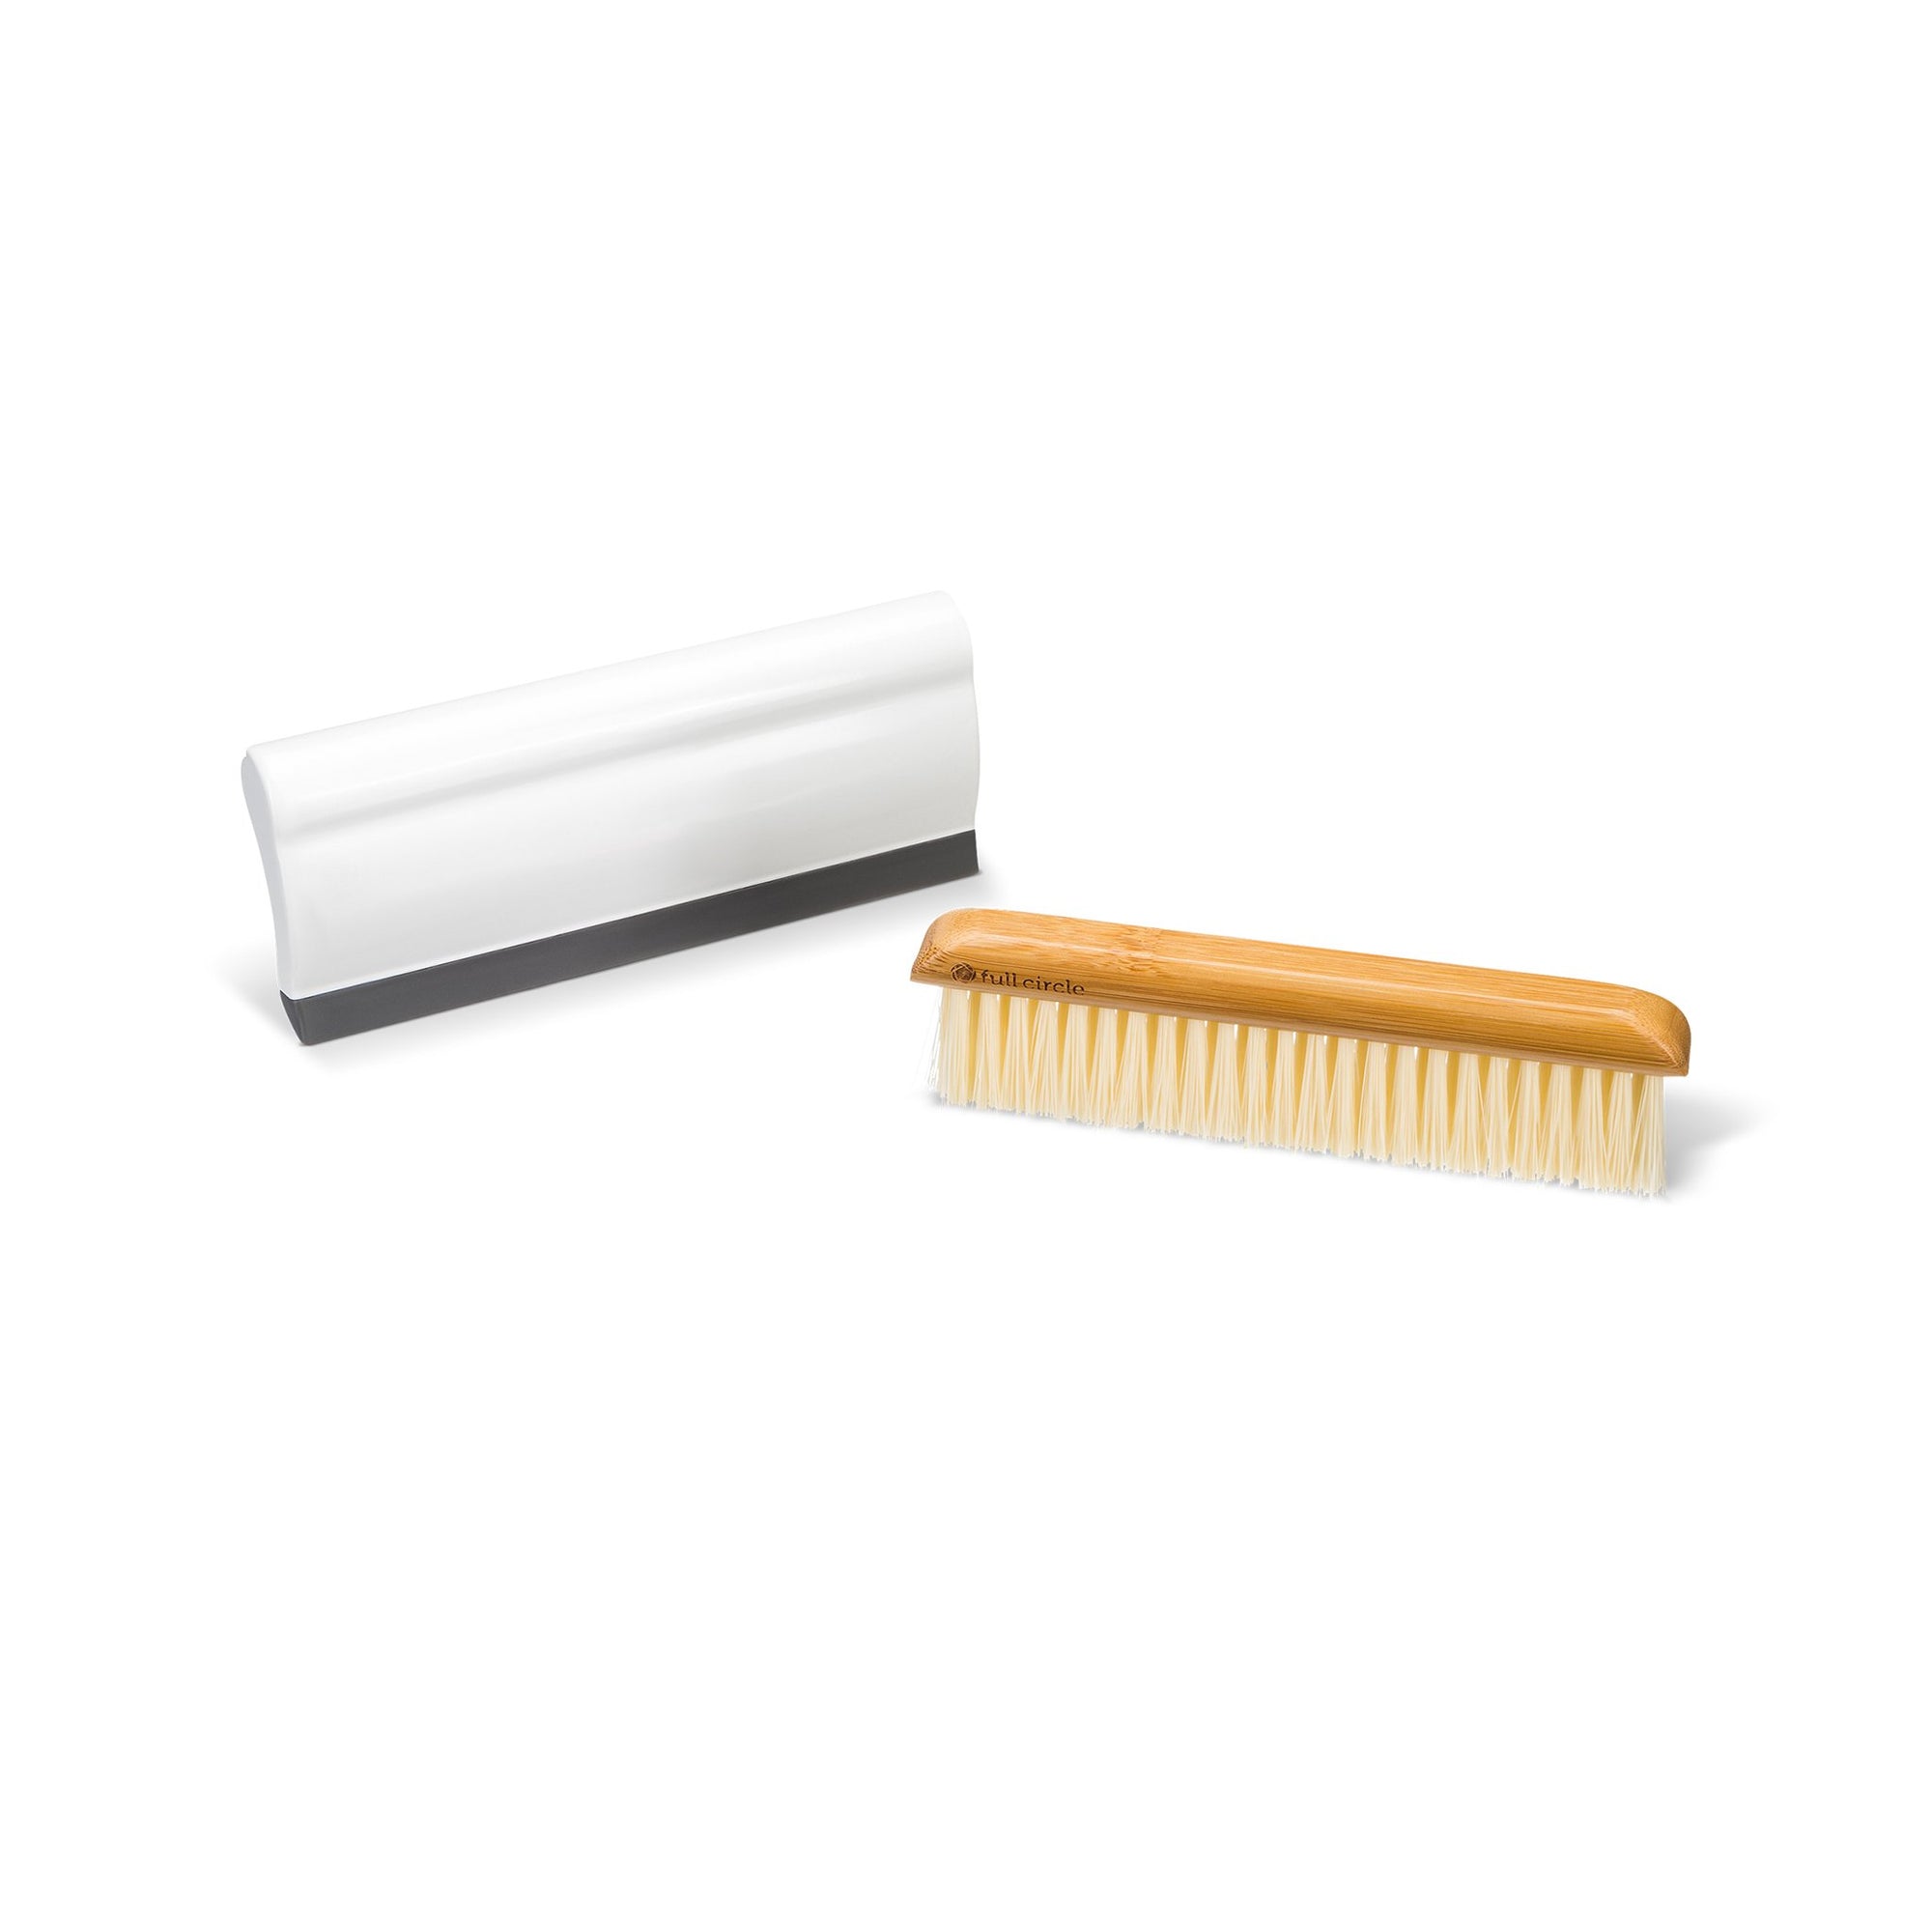 Kitchen Sink Squeegee Board And Countertop Brush, Multifunctional